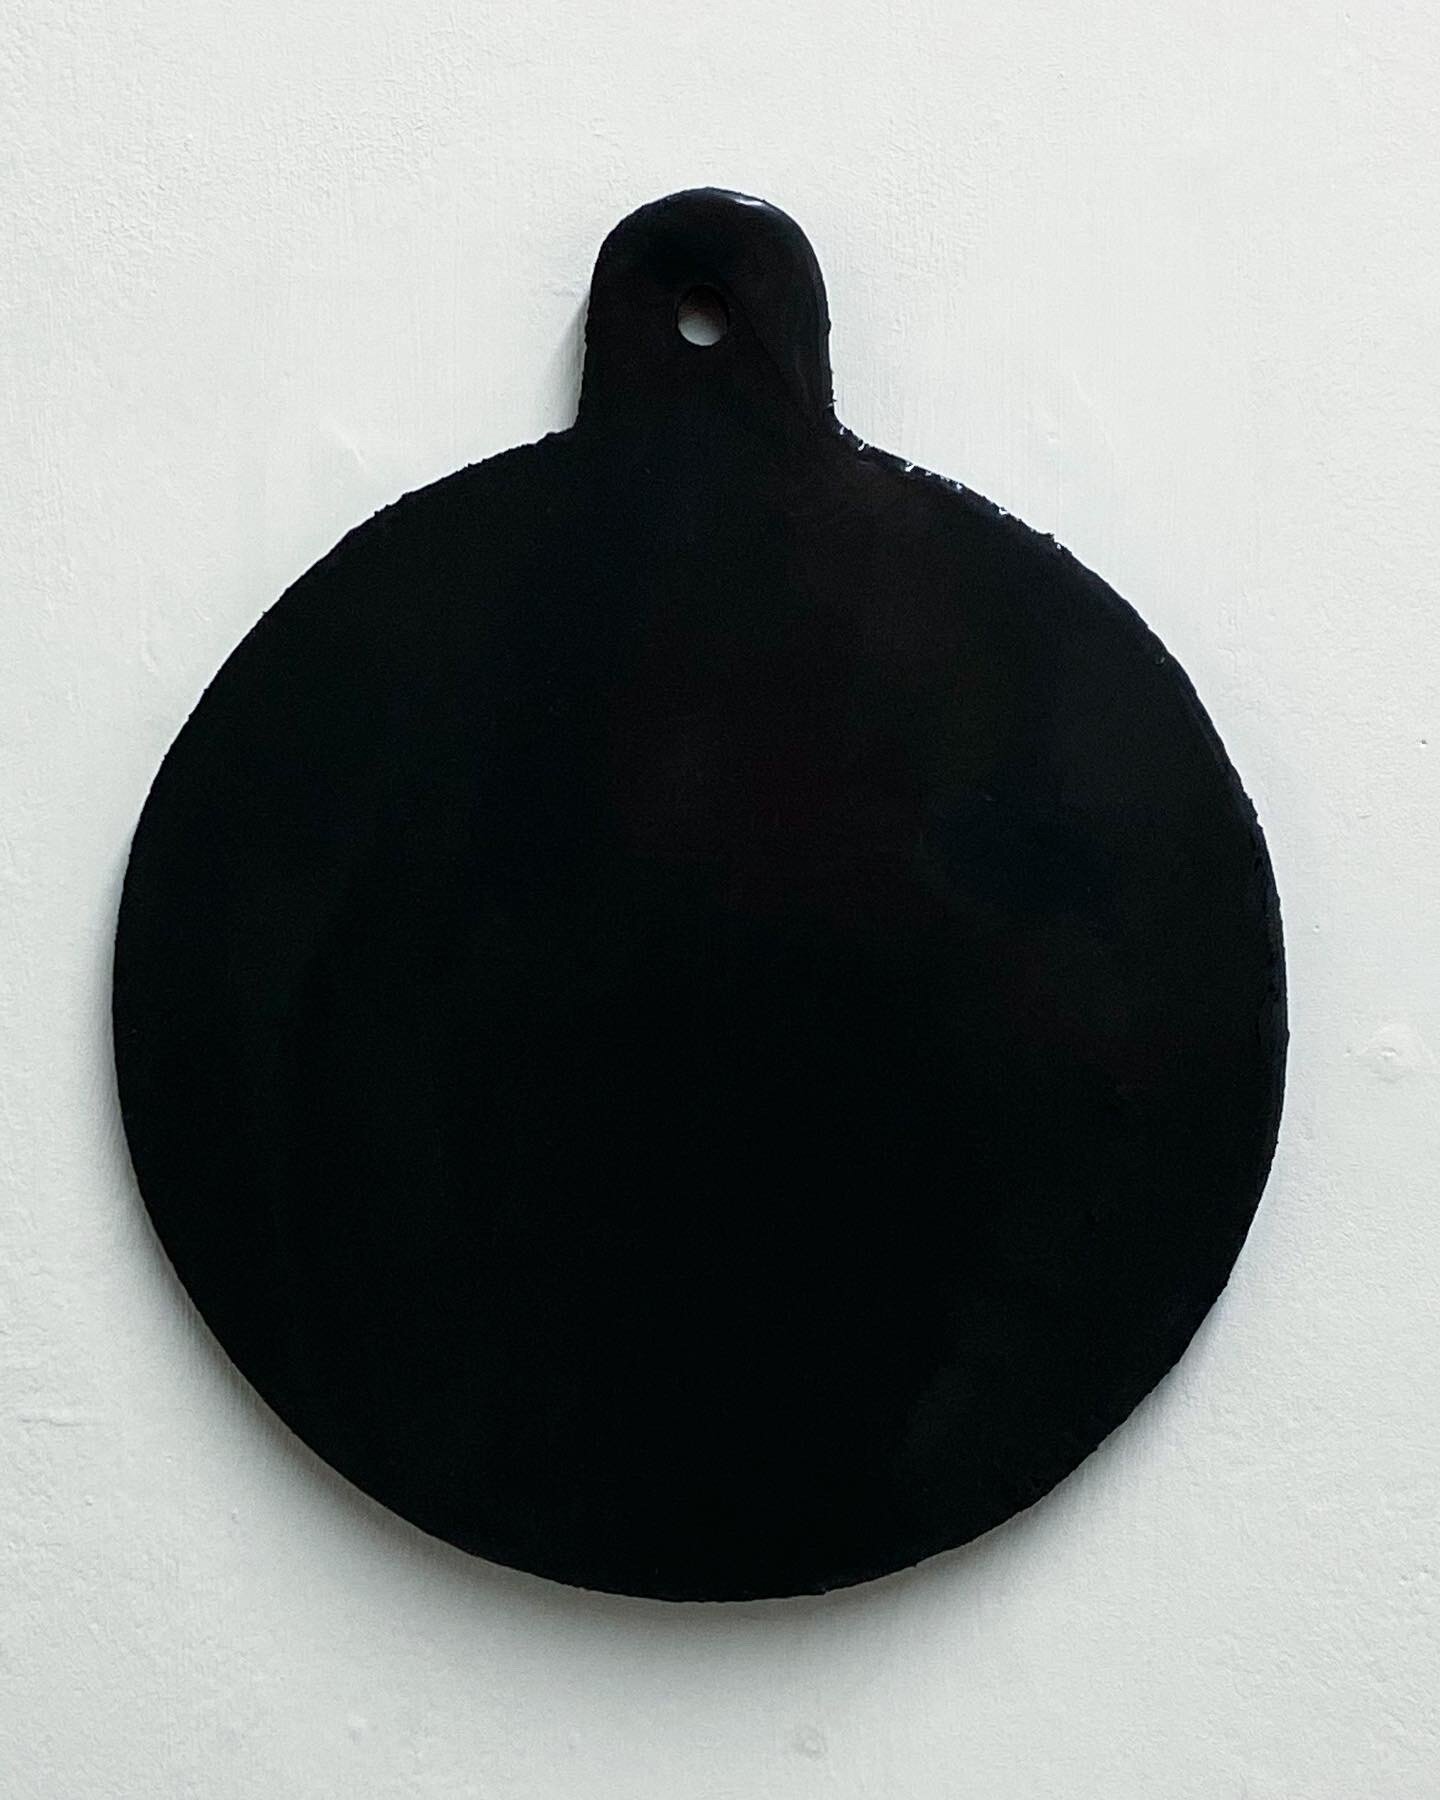  Mute Mirror 2020 Facsimile of Dr John Dee’s Scrying Mirror circa 14C - 16C  Dyed silicone cast 